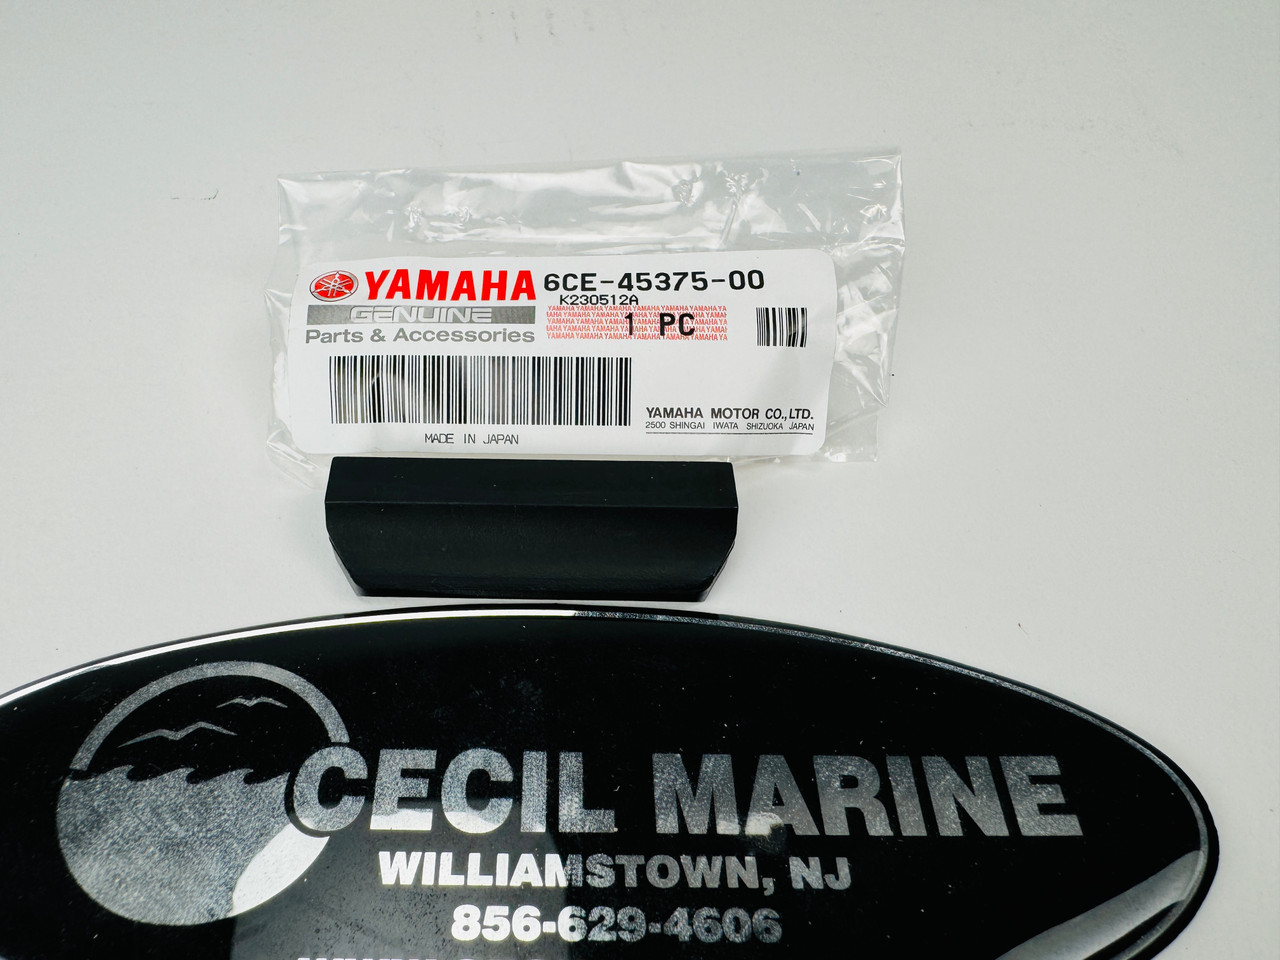 $6.99* GENUINE YAMAHA no tax* DAMPER, SEAL 6CE-45375-00-00  *In Stock & Ready To Ship!